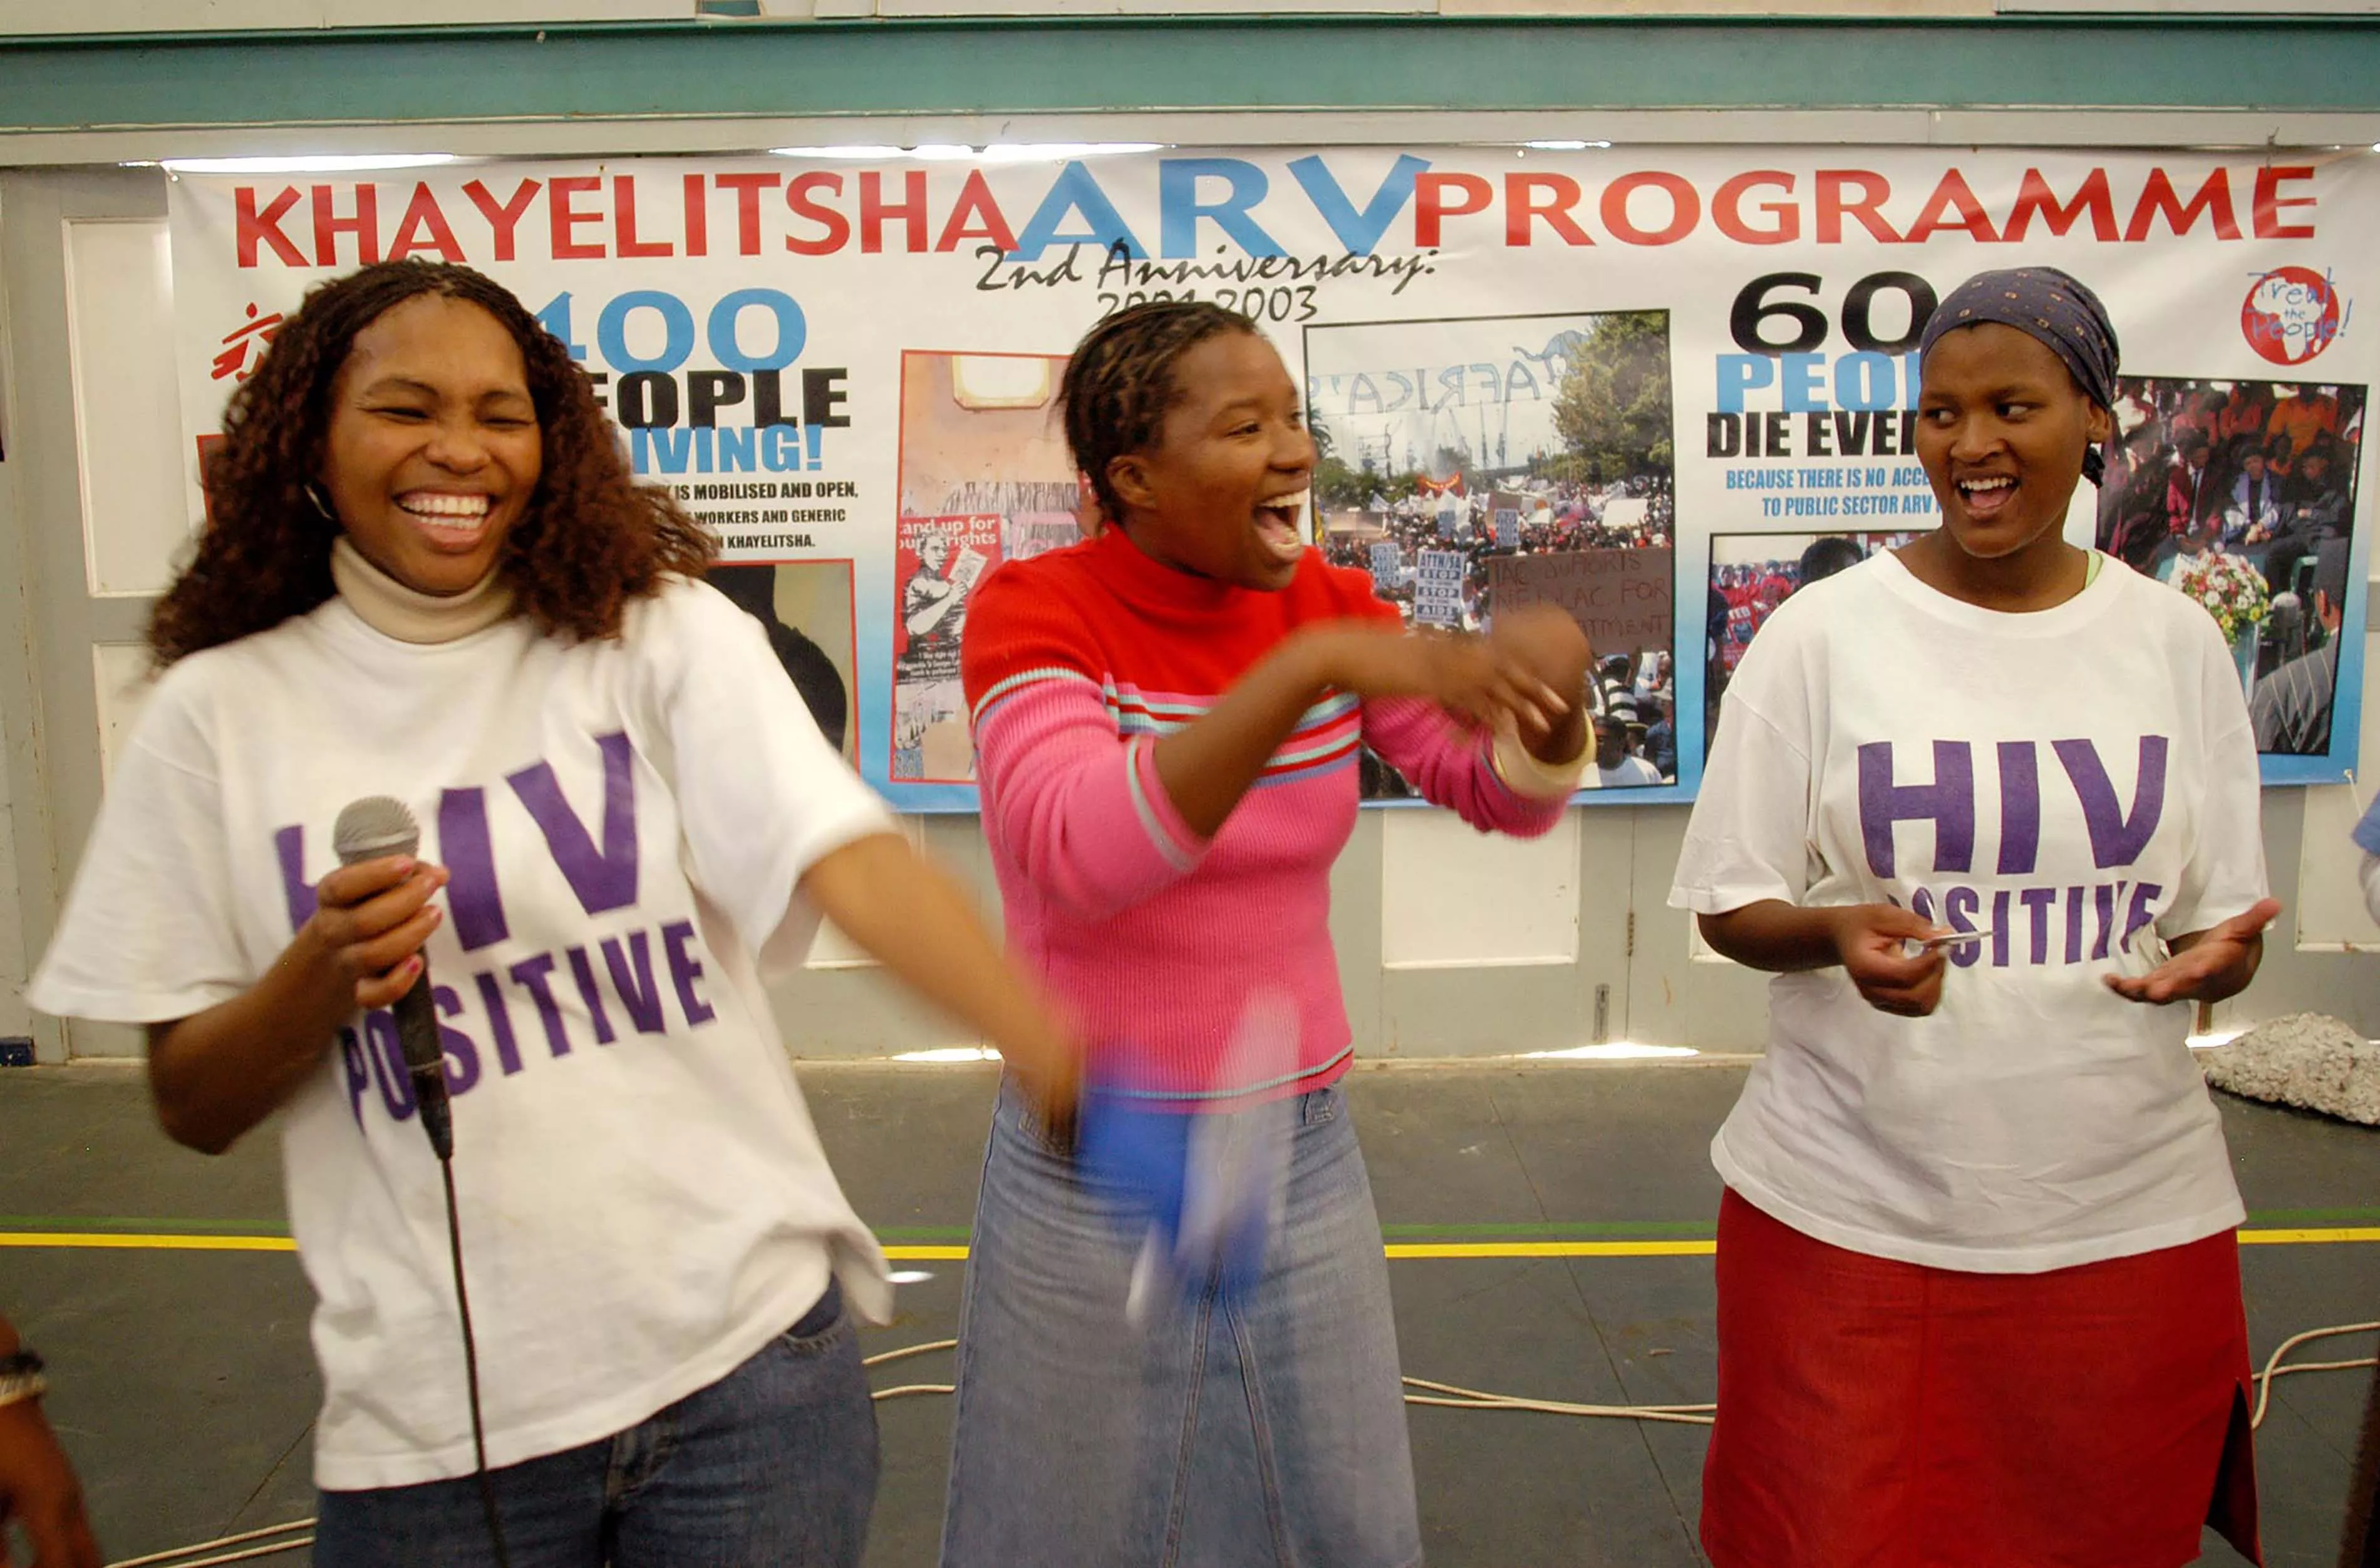 2nd anniversary of the ARV programme in Khayelitsha, a township near Cape Town, South Africa.